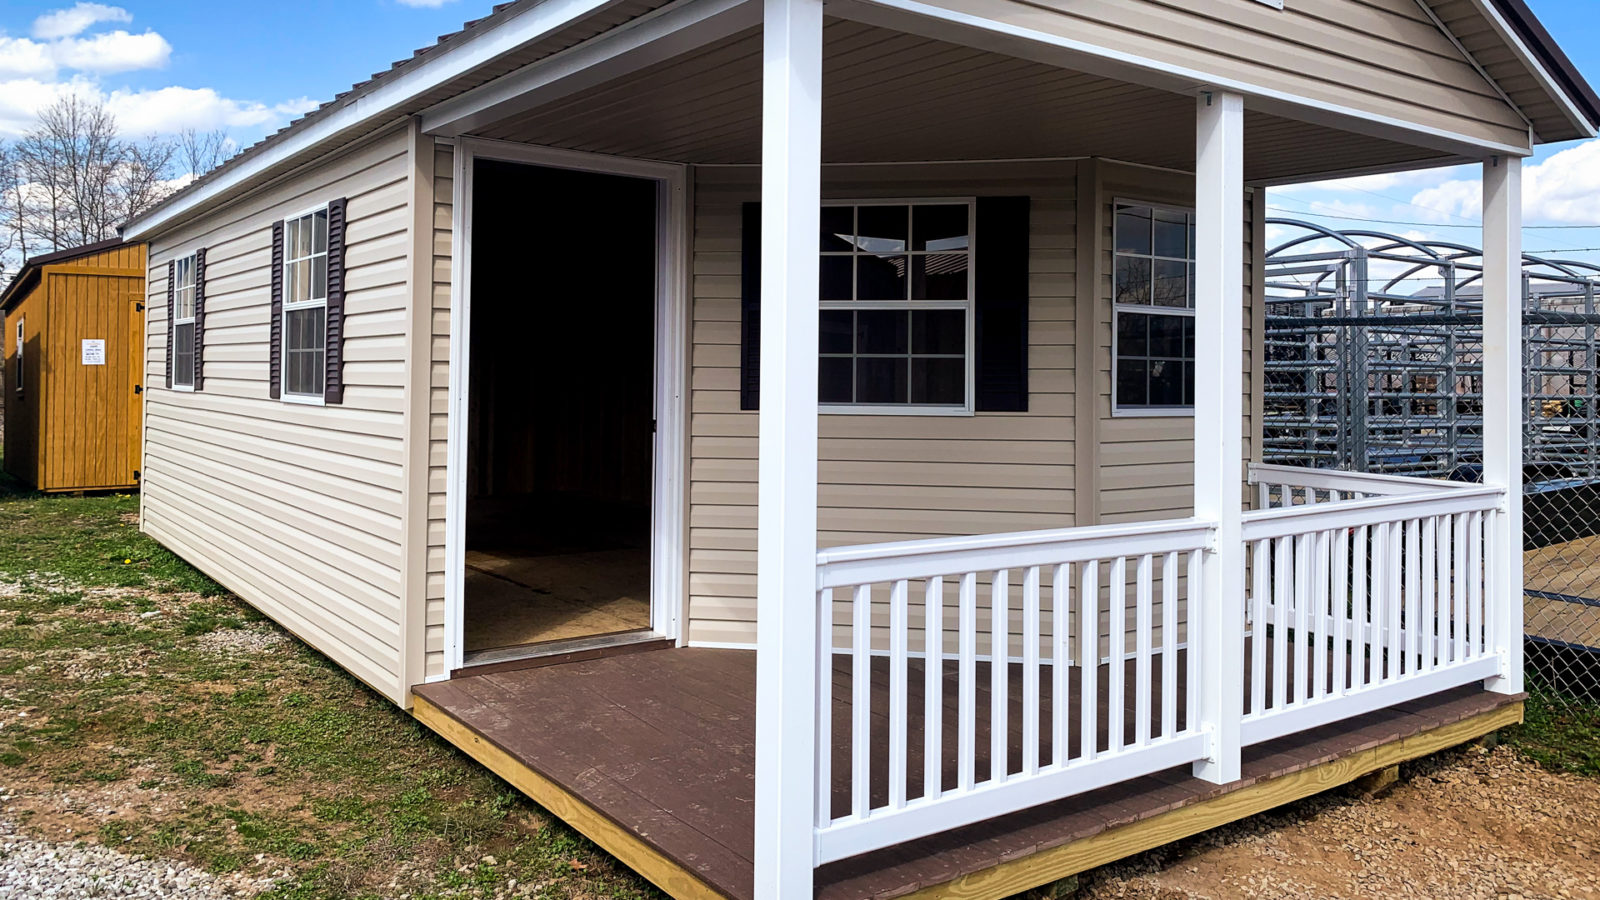 exterior of deluxe porch for sheds with porches for sale article